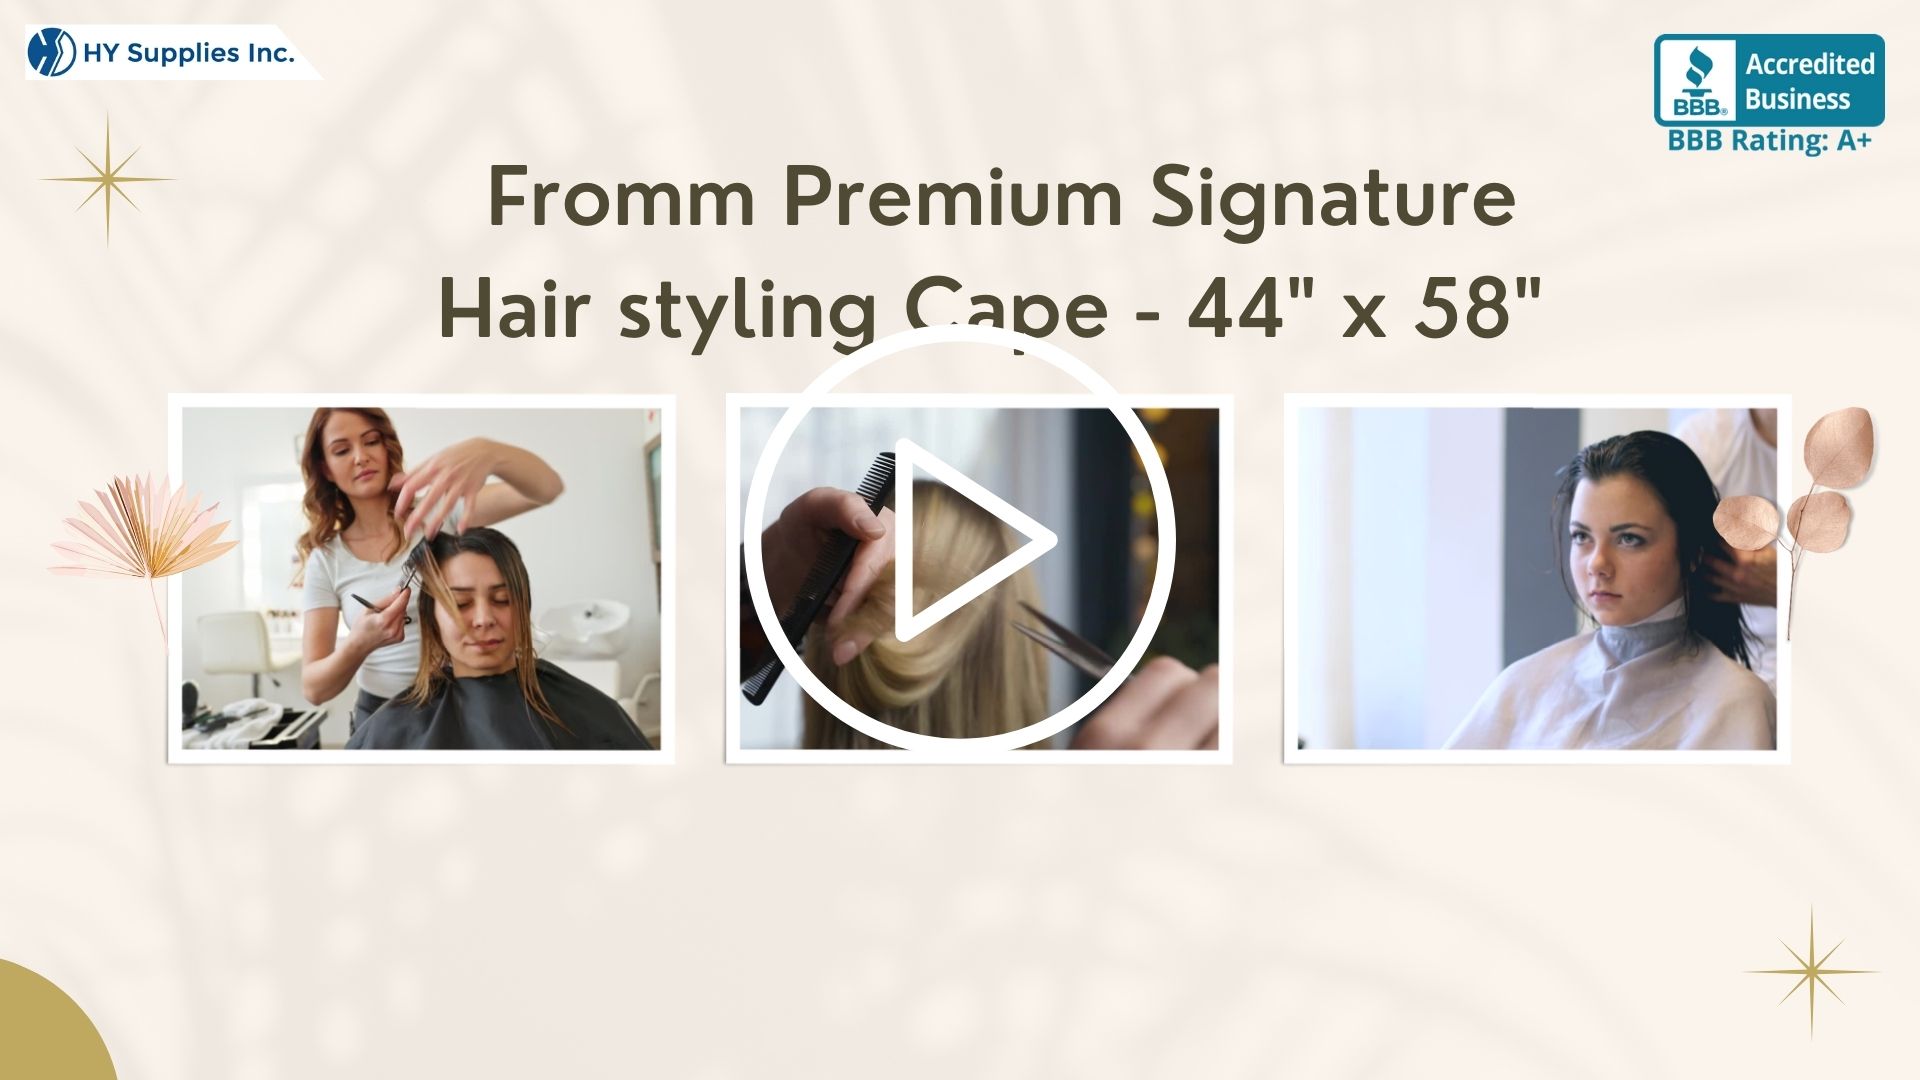 Fromm Premium Signature Hairstyling Cape - 44" x 58"